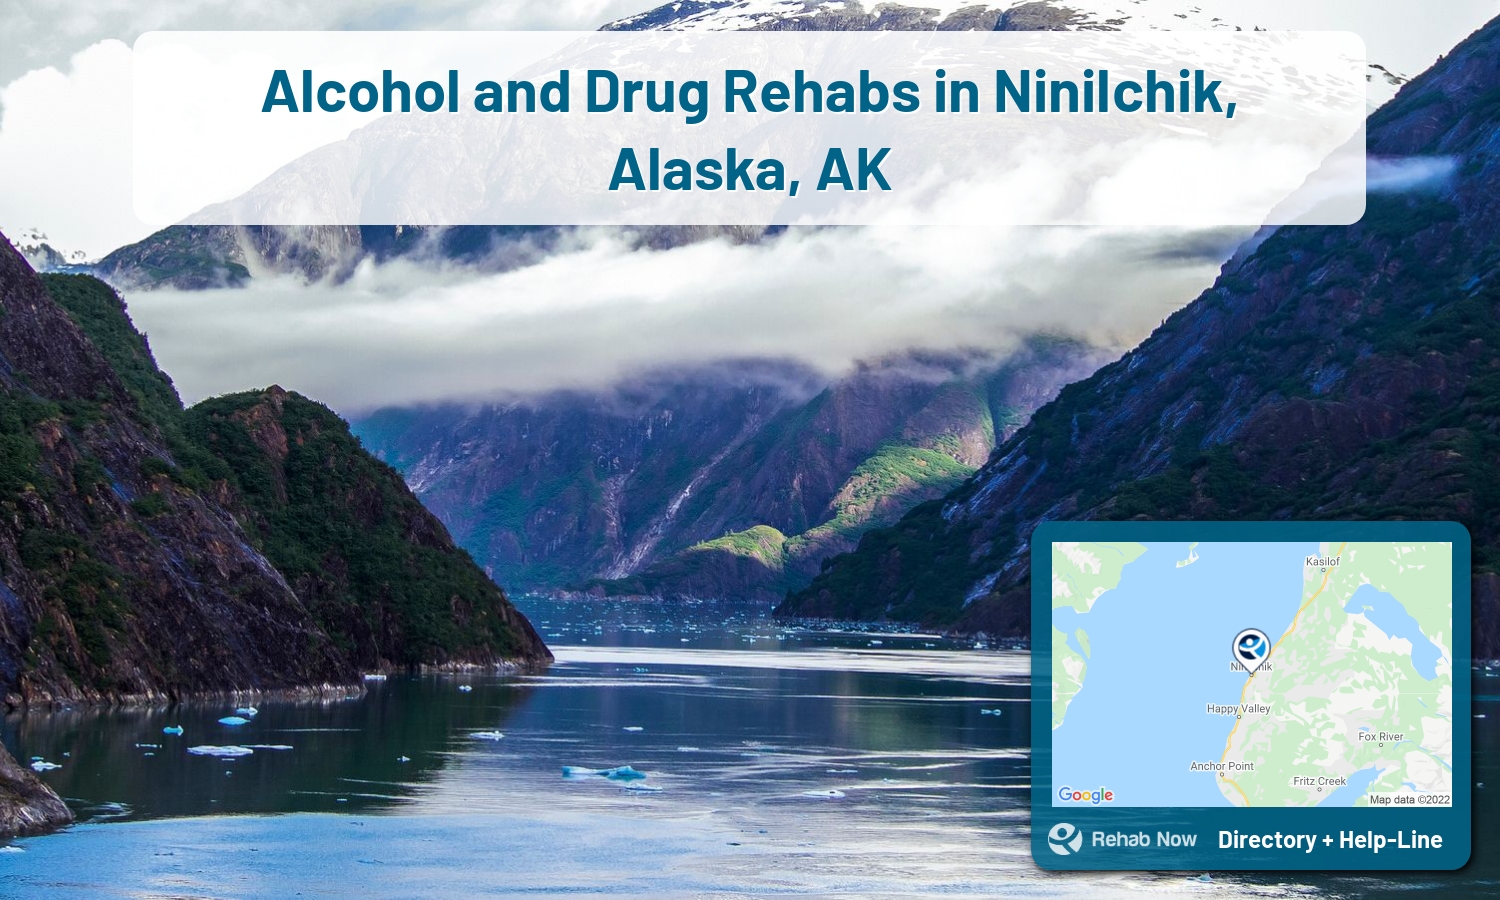 List of alcohol and drug treatment centers near you in Ninilchik, Alaska. Research certifications, programs, methods, pricing, and more.